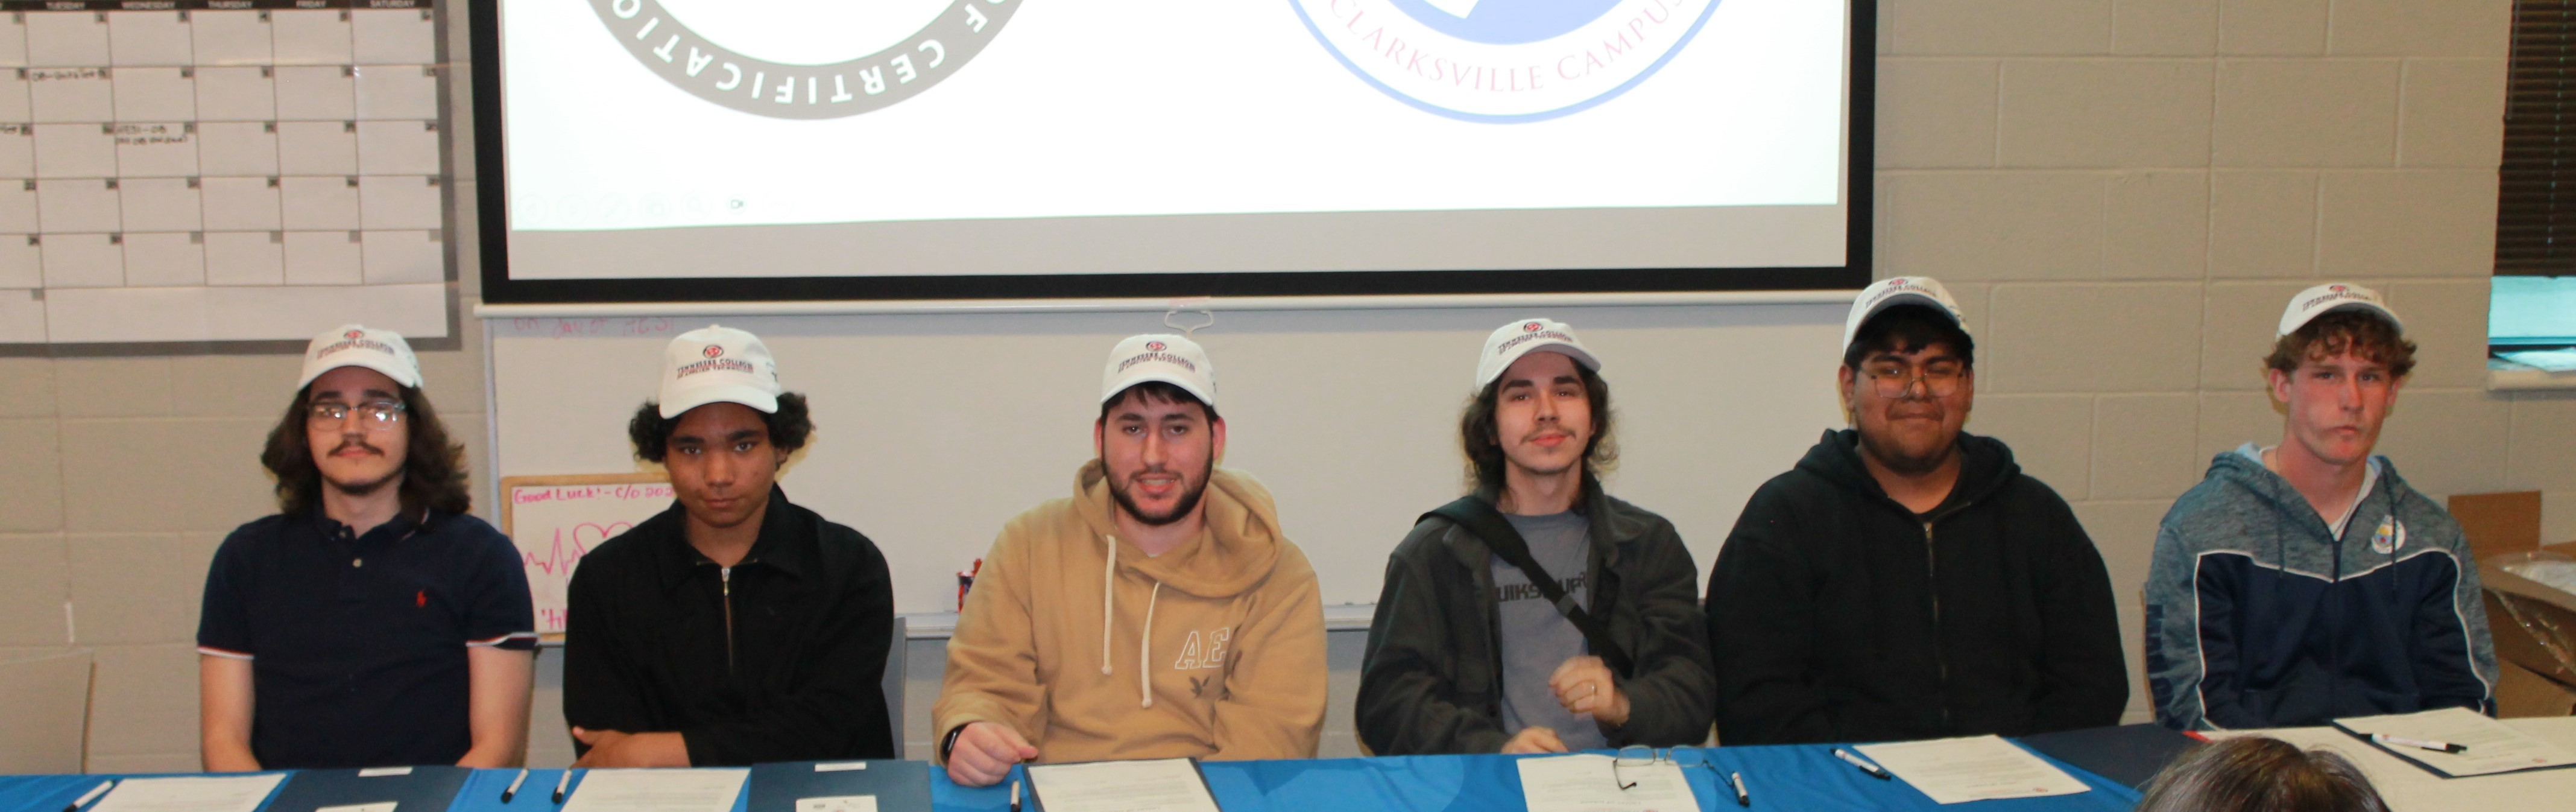 NC3, Clarksville Campus NC3, NC3 Signing Day